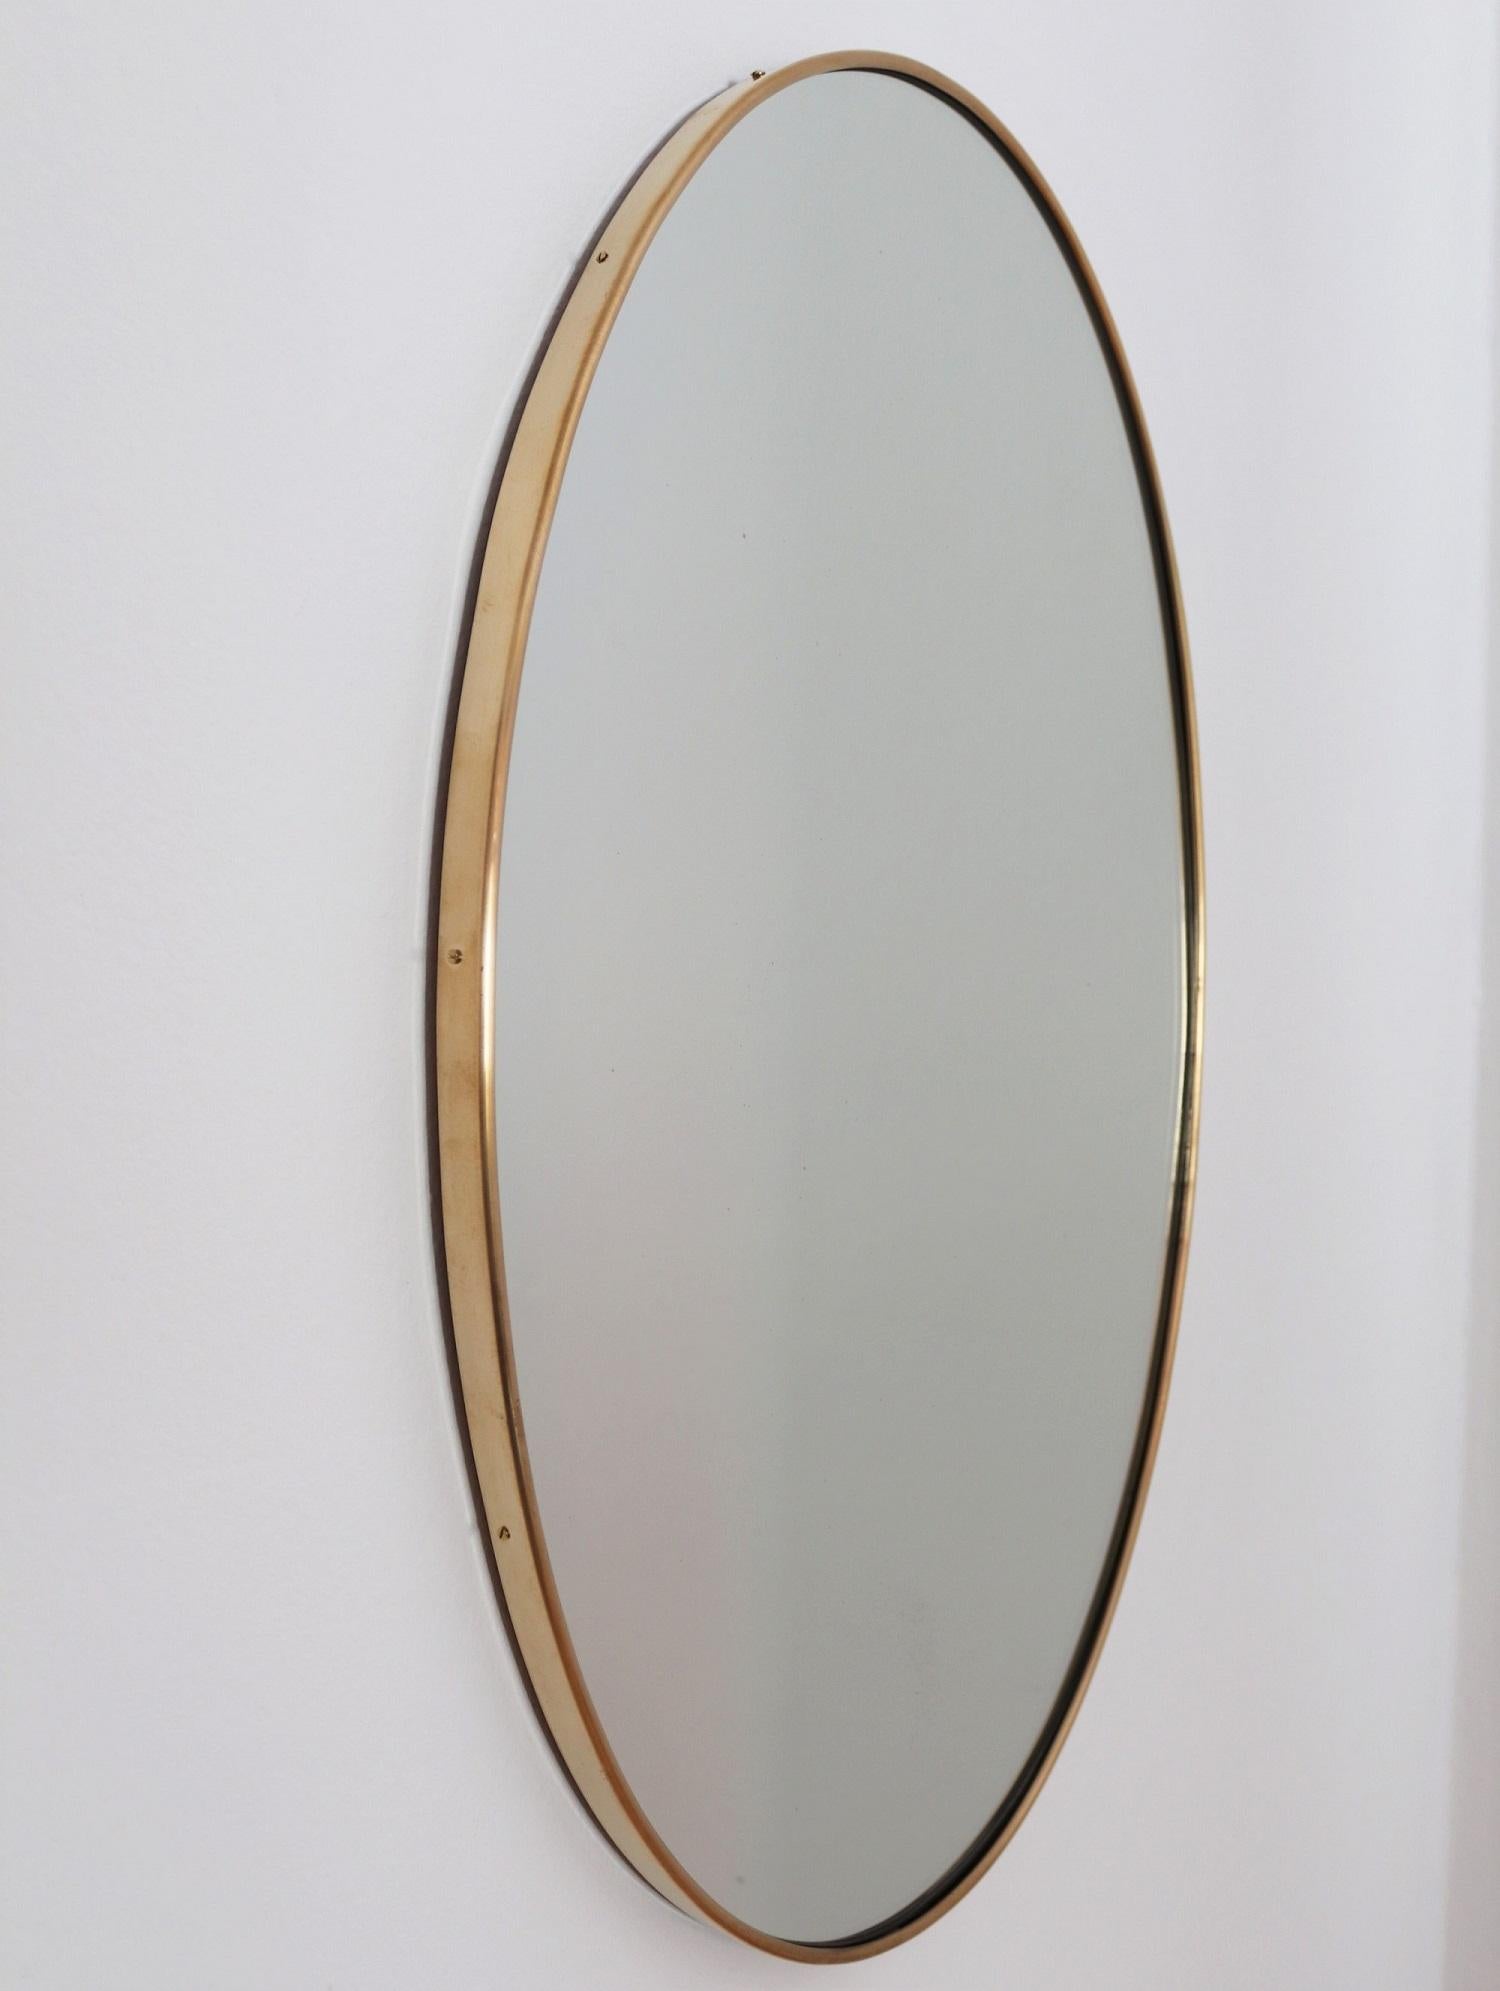 Beautiful Italian midcentury wall mirror with original brass frame.
Made in Italy in the 1950s.
The wall mirror is completely in original, cleaned condition. 
On the mirror glass are some light normal vintage spots, almost not seen when the